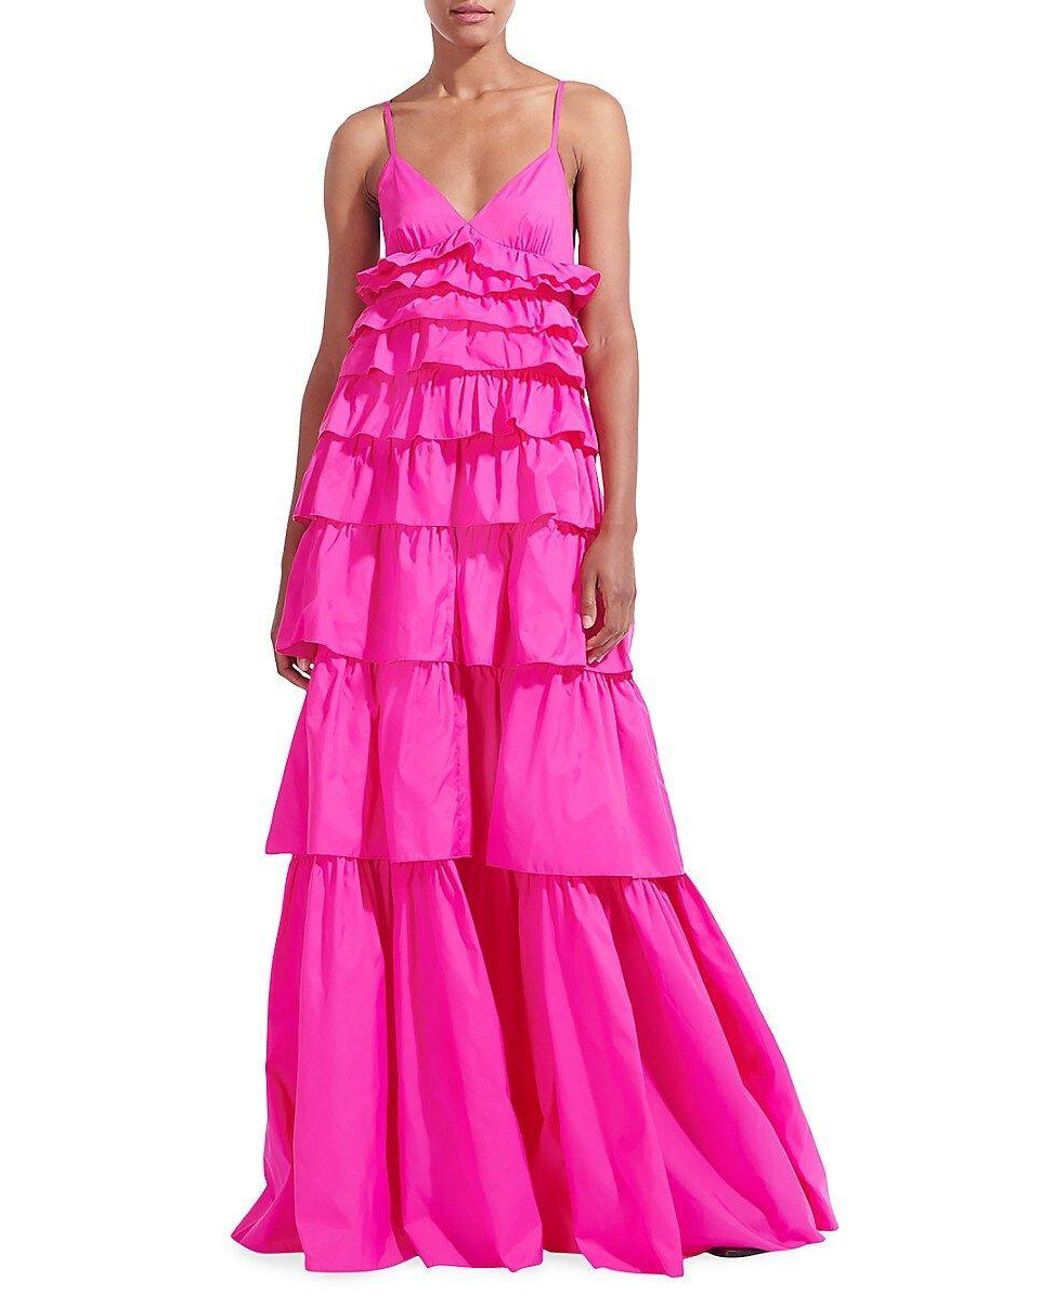 STAUD Rylie Tiered Ruffle Maxi Dress in Pink | Lyst